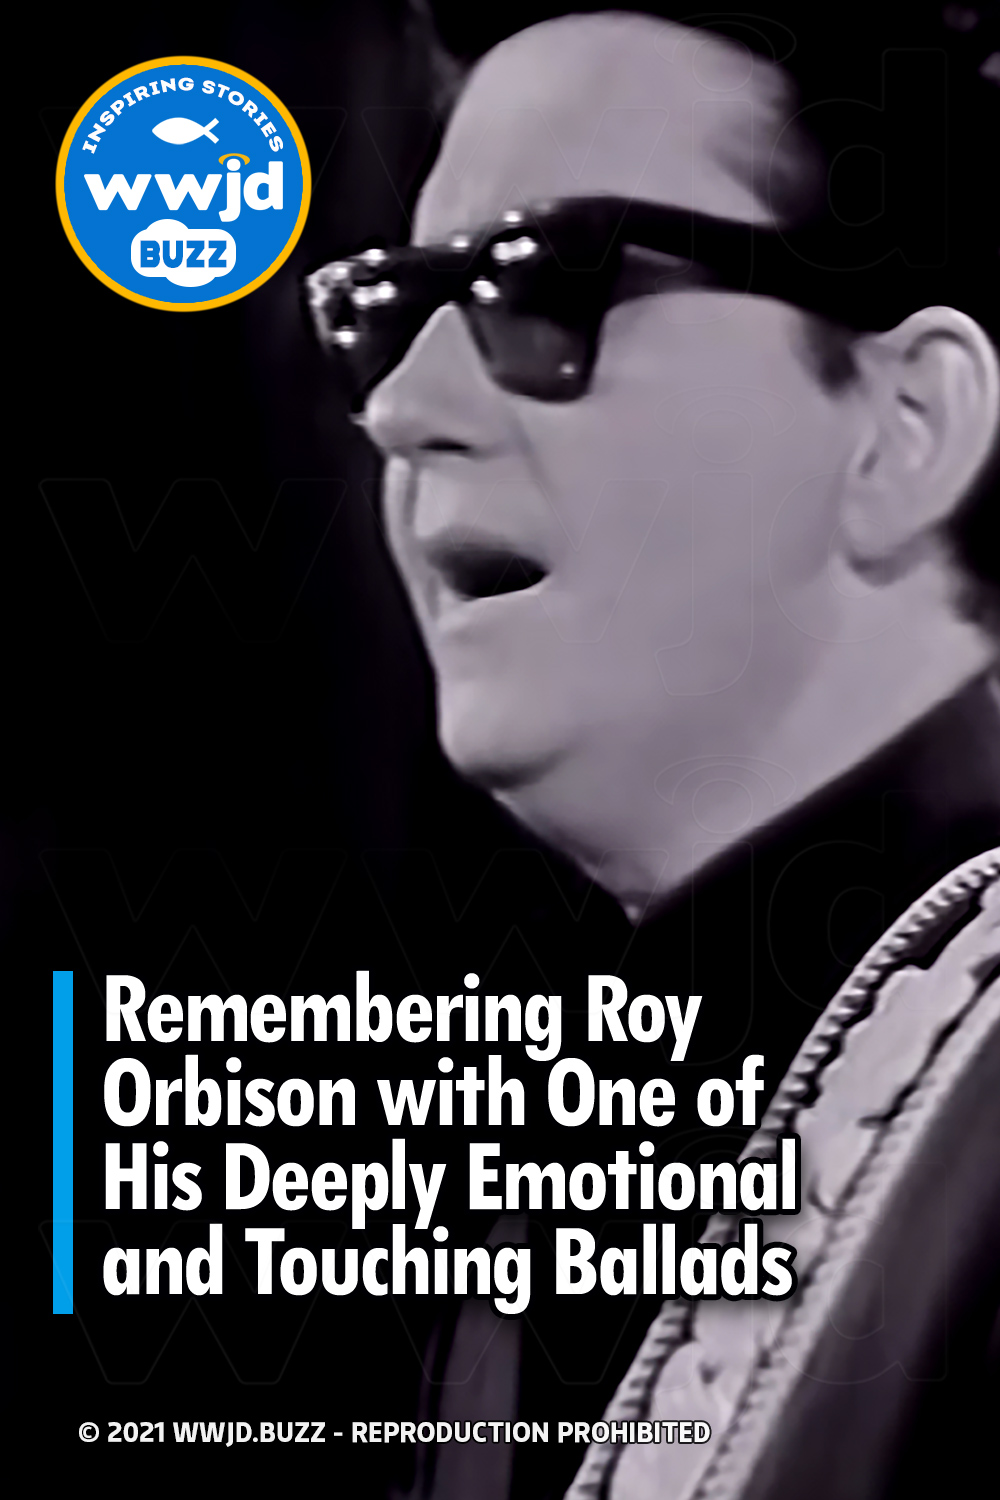 Remembering Roy Orbison with One of His Deeply Emotional and Touching Ballads